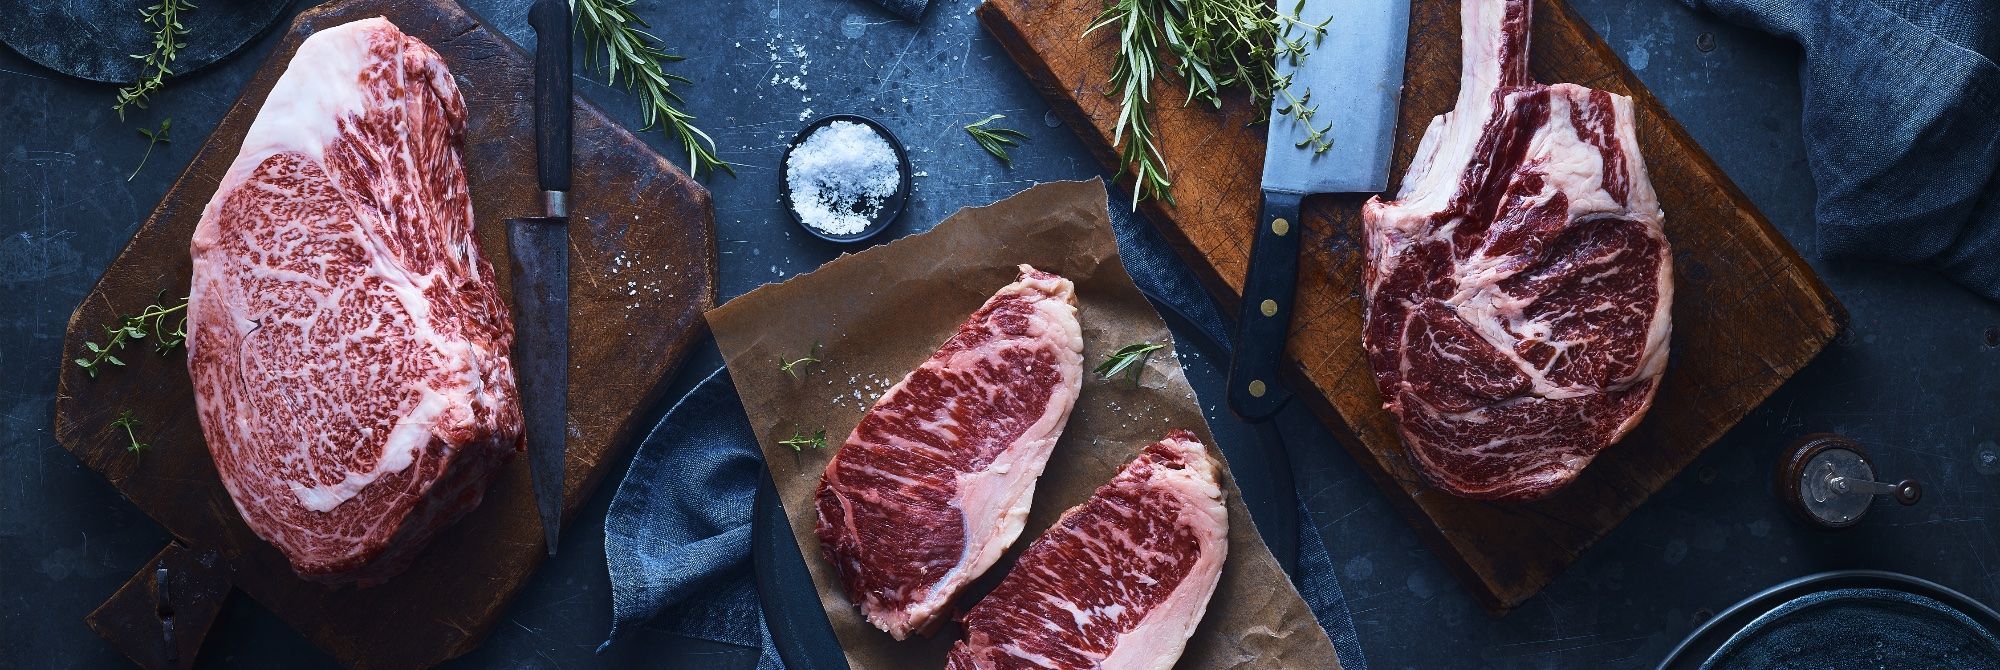 The Best Bulk Meat Delivery from America's Original Butcher